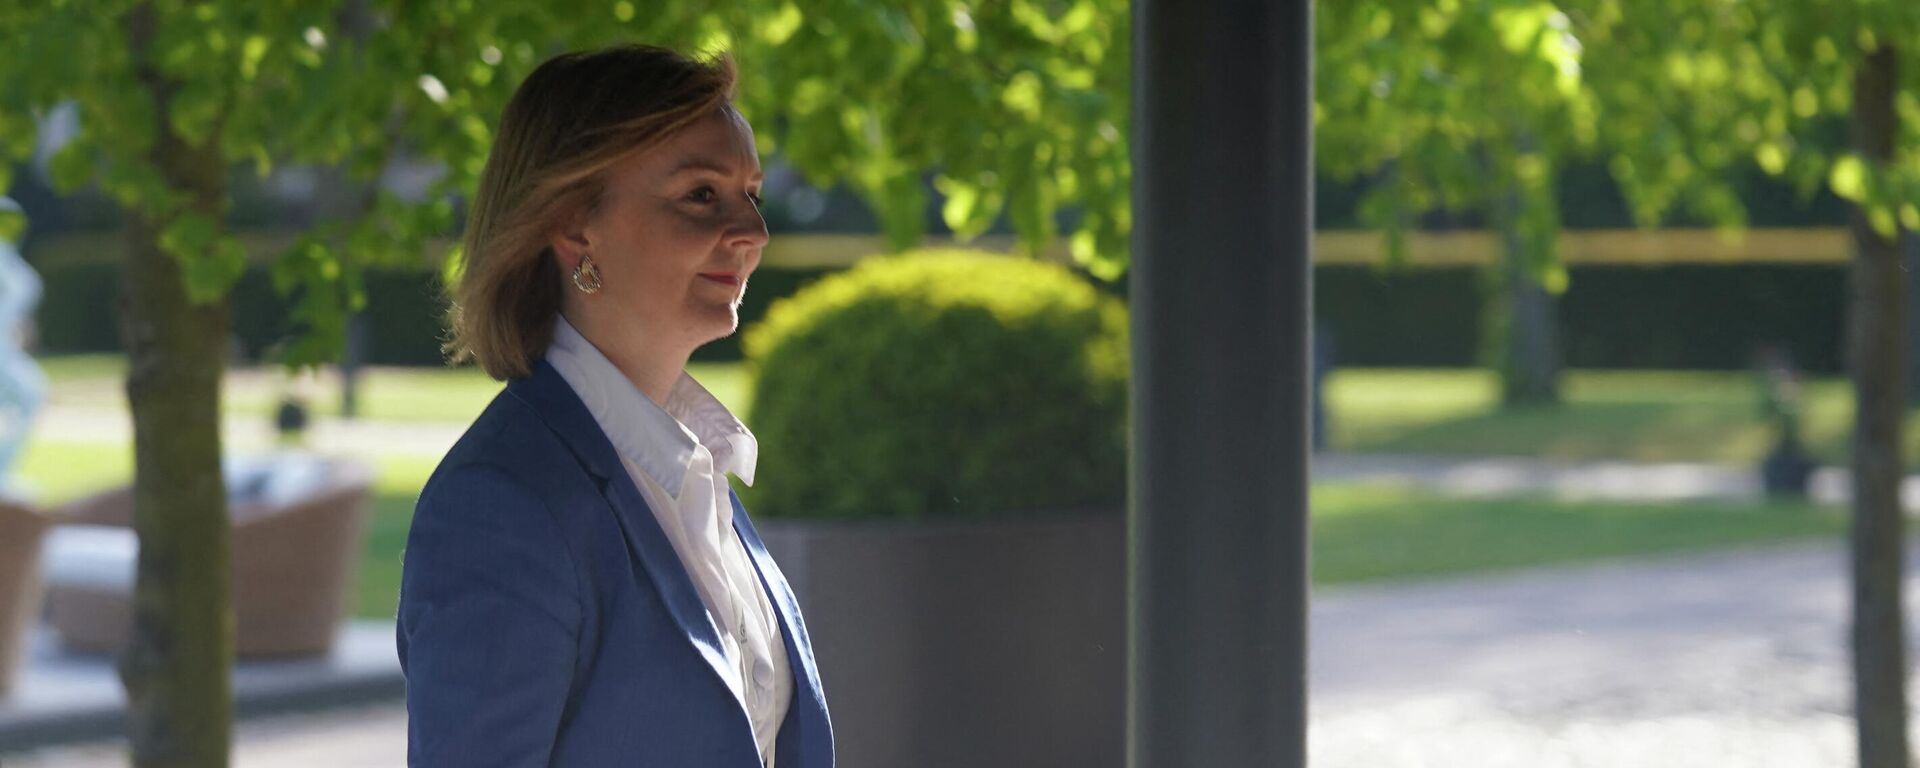 British Secretary for Foreign Affairs Elizabeth Truss (L) walks to bilateral talks with her Japanese counterpart at the meeting of the G7 foreign ministers at the Weissenhдuser Strand in Wangels, Northern Germany on May 12, 2022. - Sputnik International, 1920, 26.05.2022